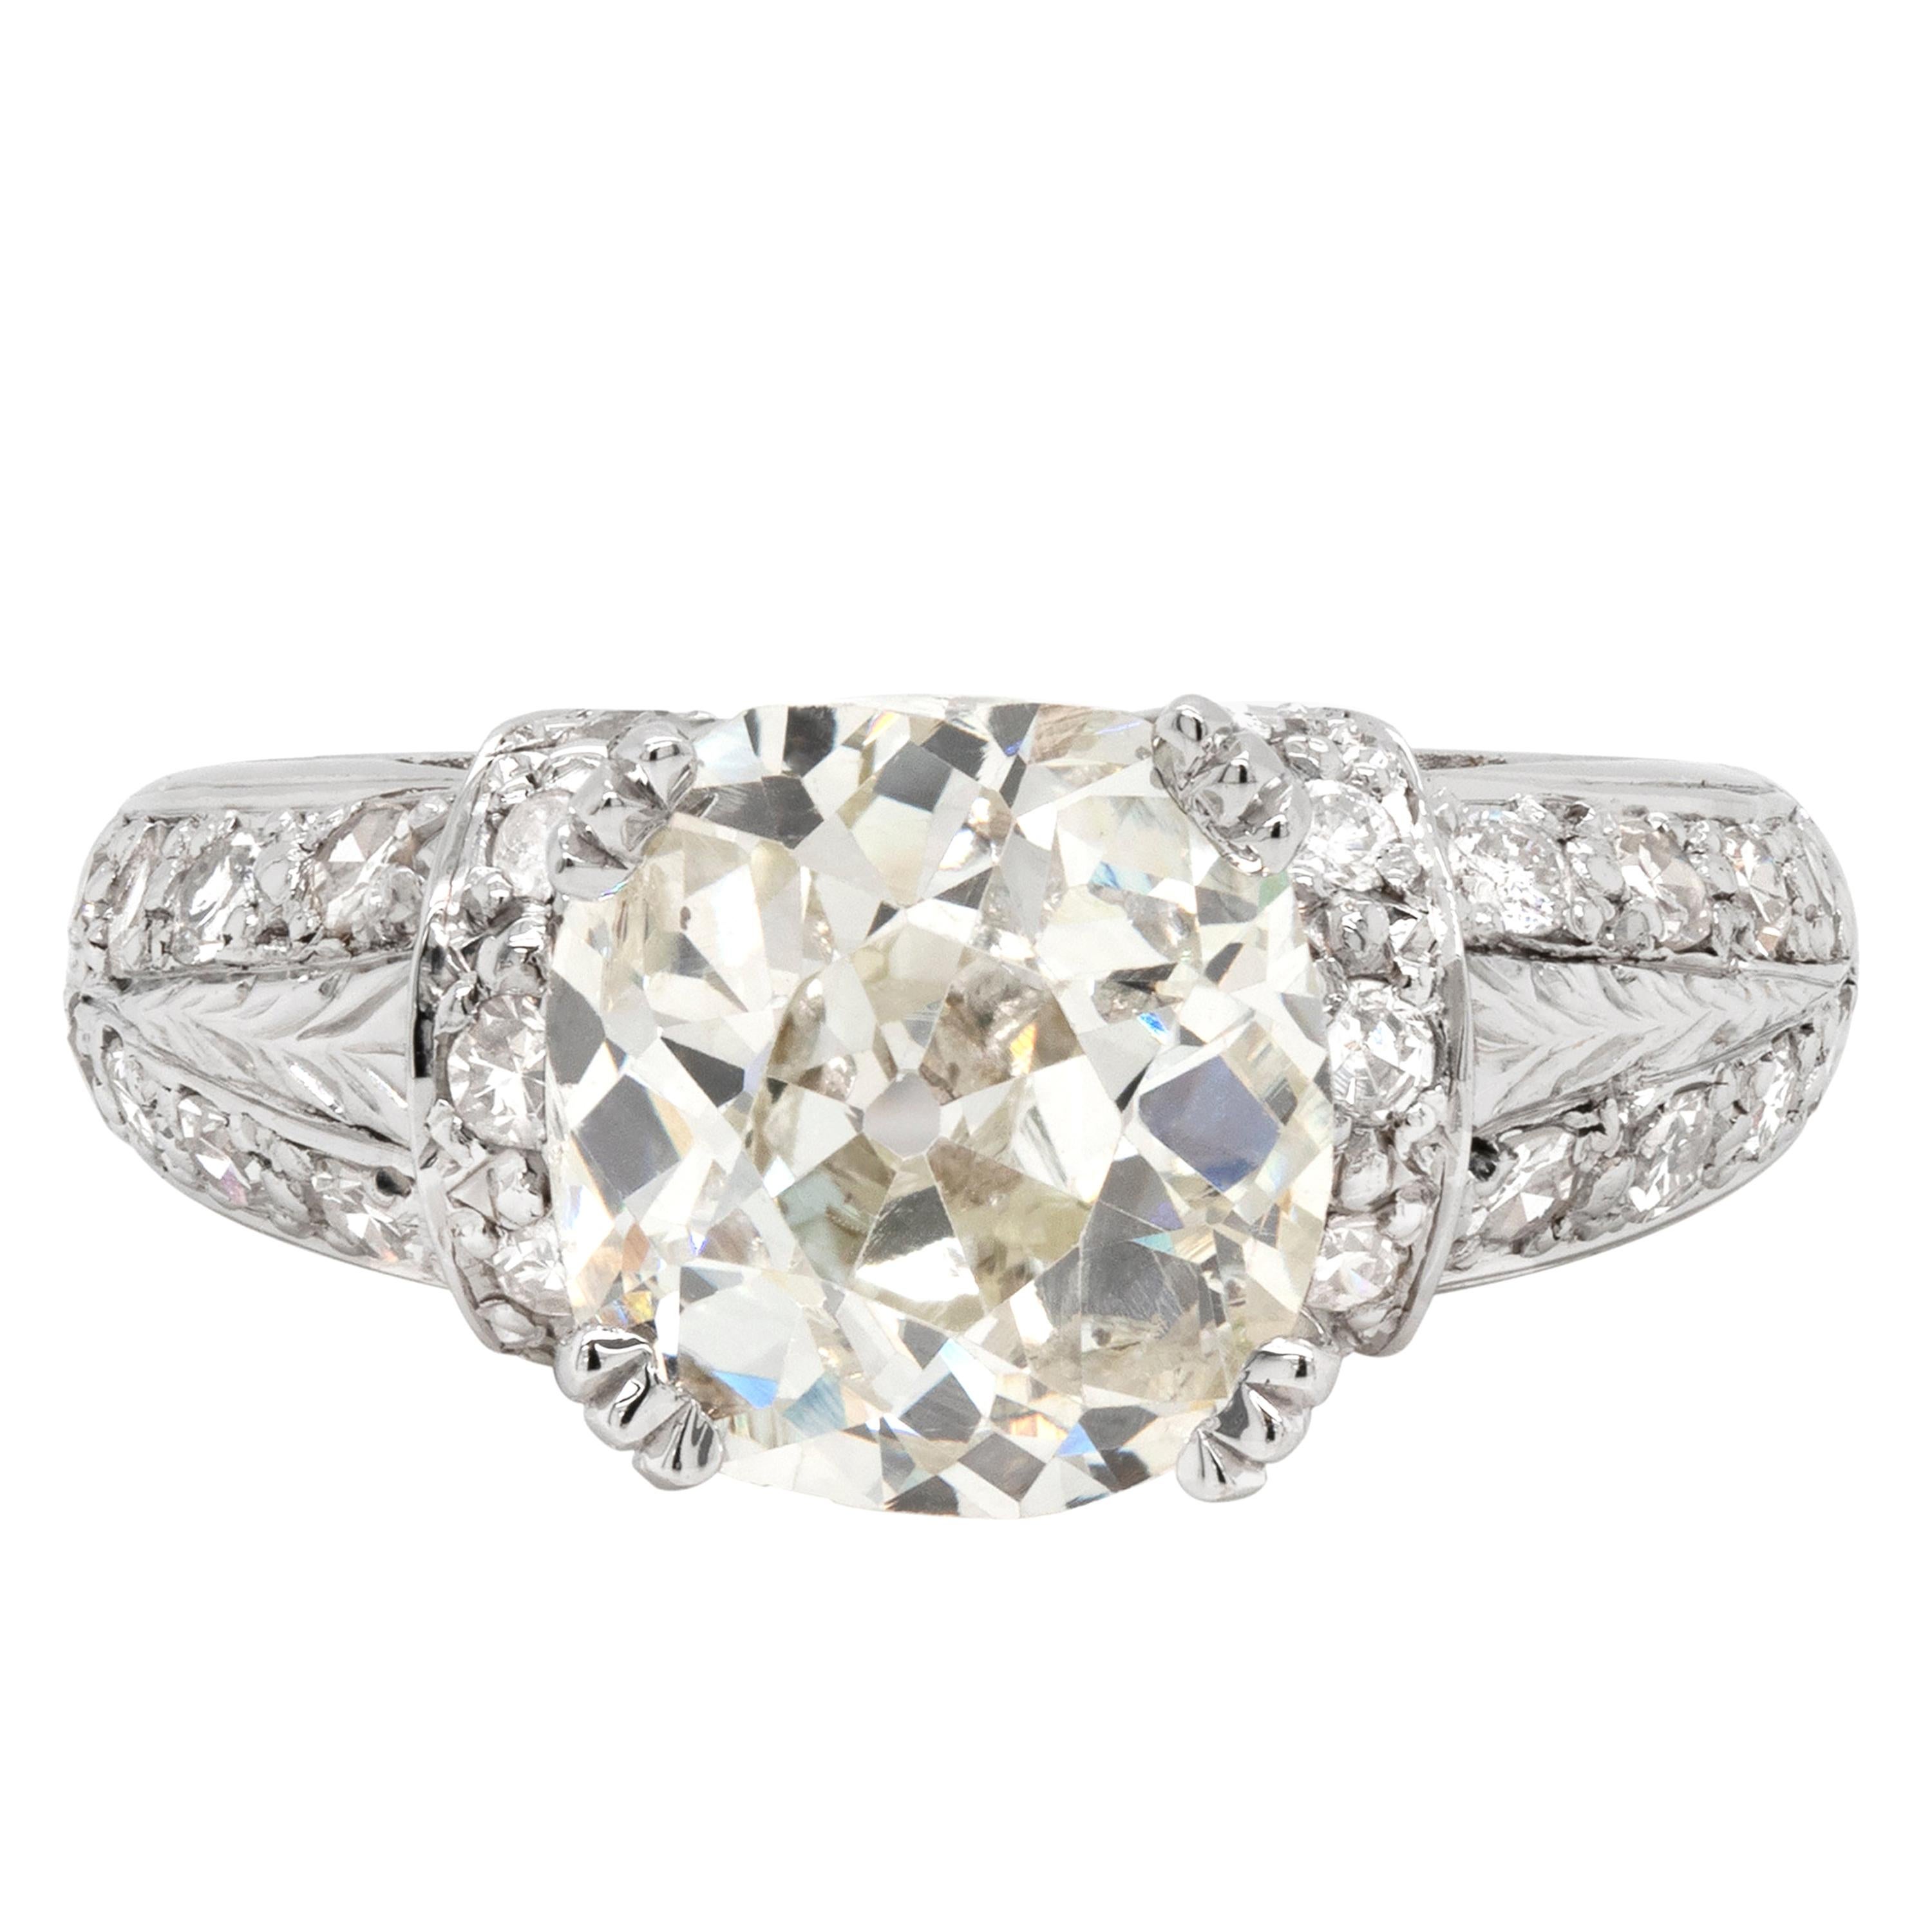 3.32 Carat Old Victorian Cushion Cut Diamond 18 Carat Gold Engagement Ring For Sale